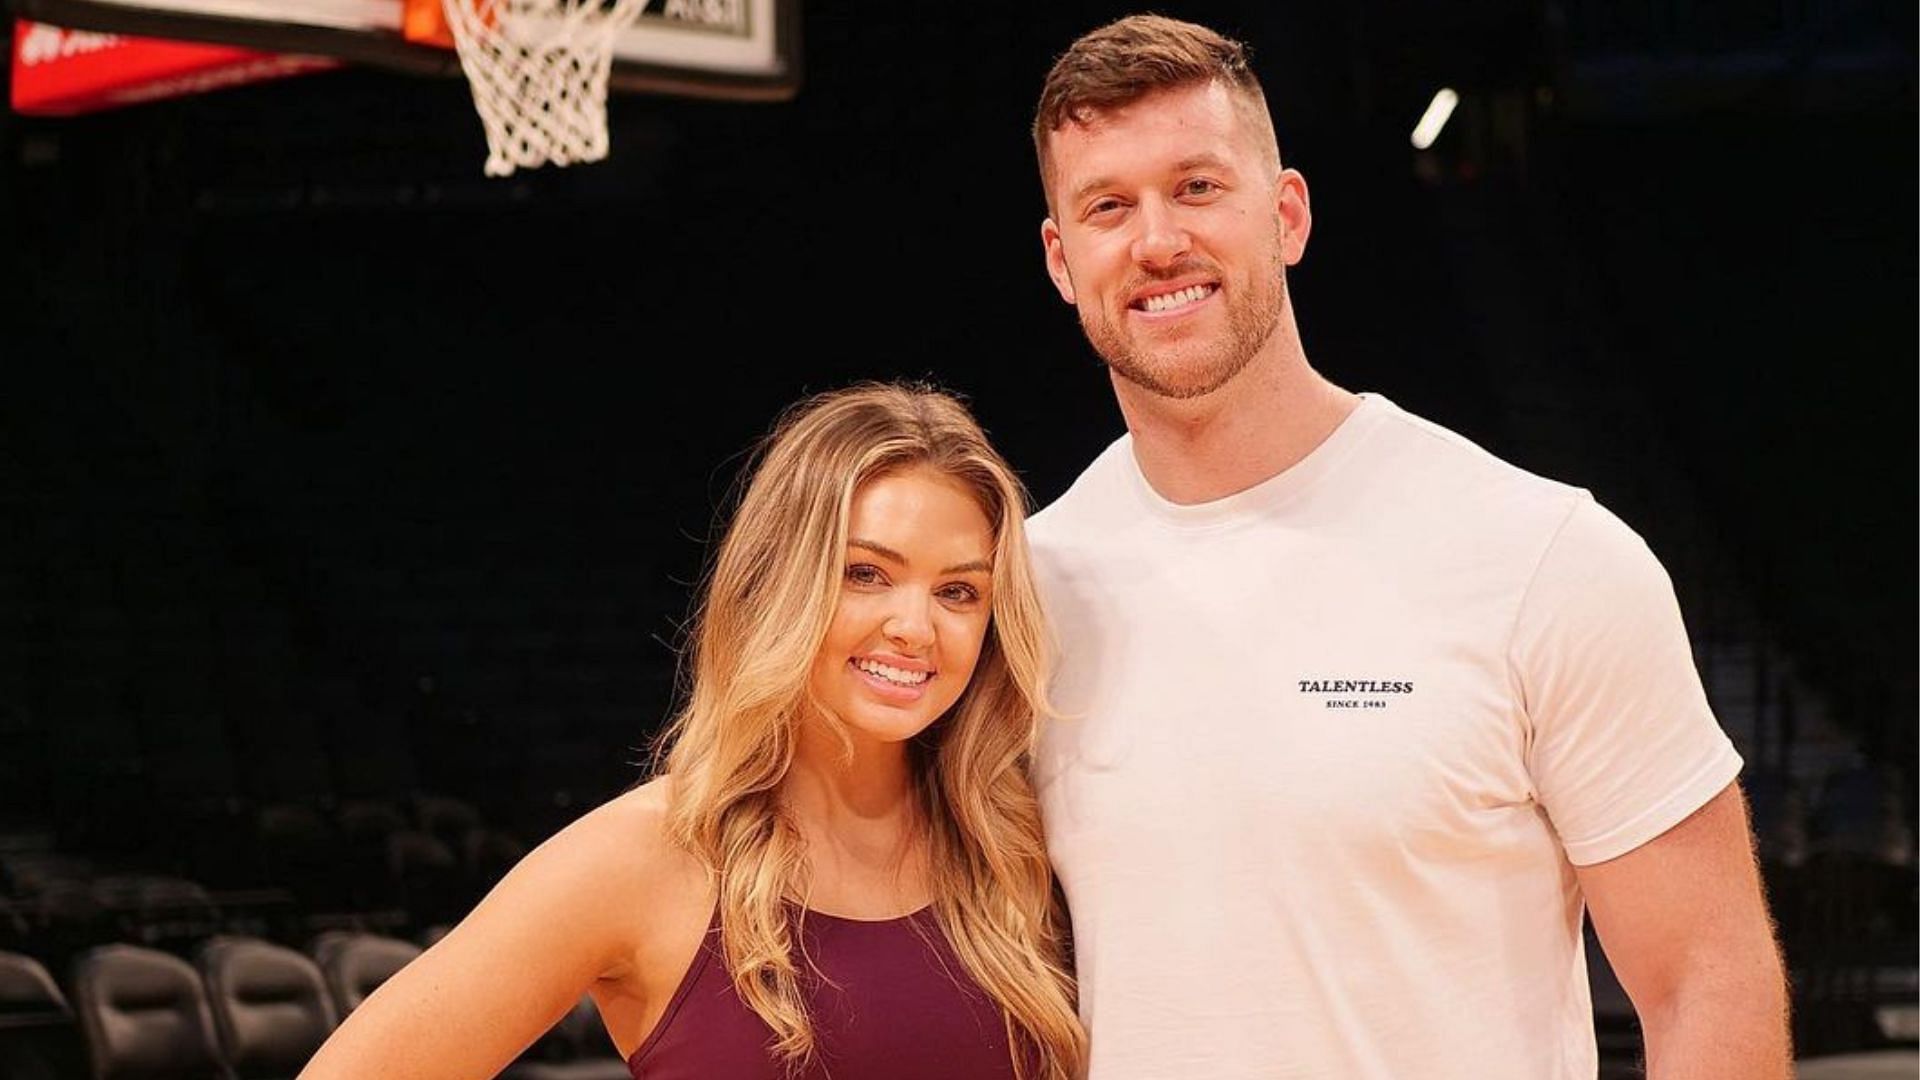 Former Bachelor couple Clayton Echard and Susie Evans take about their split (Image via claytonechard and susiecevans/Instagram)